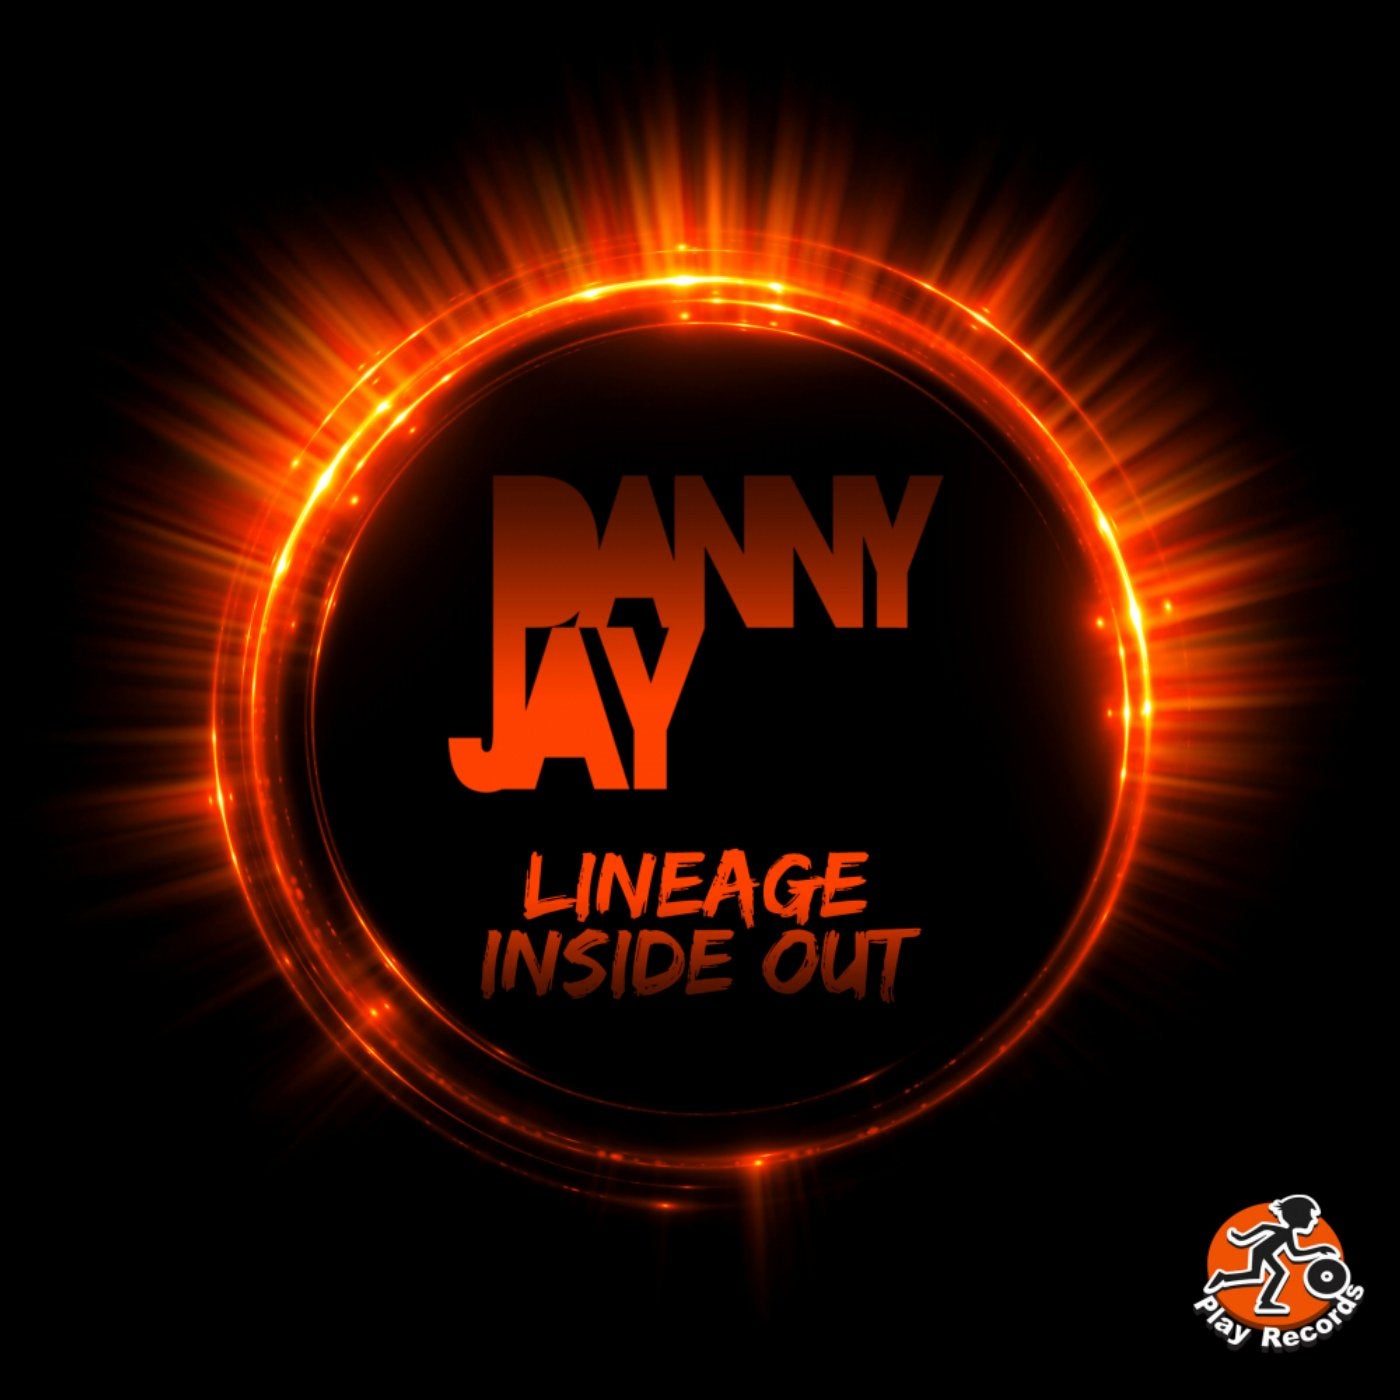 Lineage / Inside Out